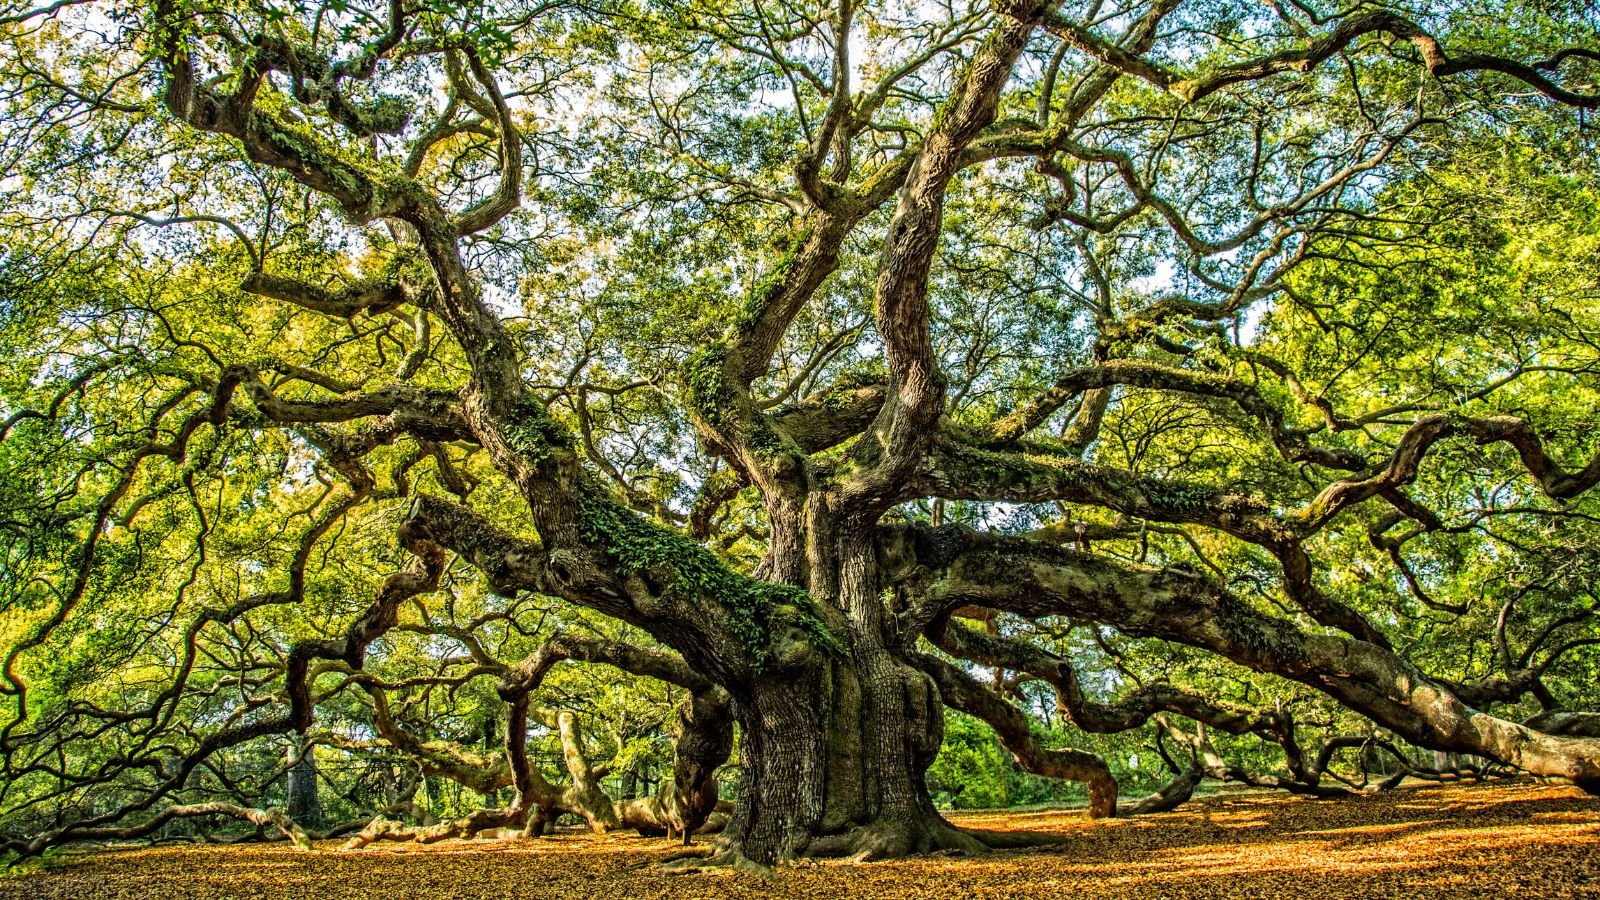 <p>Angel Oak, located approx<a href="https://travel.usnews.com/Charleston_SC/Things_To_Do/Angel_Oak_Tree_64690/" rel="noopener"> 13 miles</a> from downtown Charleston, South Carolina, is considered one of the most beautiful places in the United States. You can visit the surrounding forest for free. Simply park your car in a nearby lot, and go out, you’ll be greeted by crickets, birds, and the sound of leaves in the air.</p>